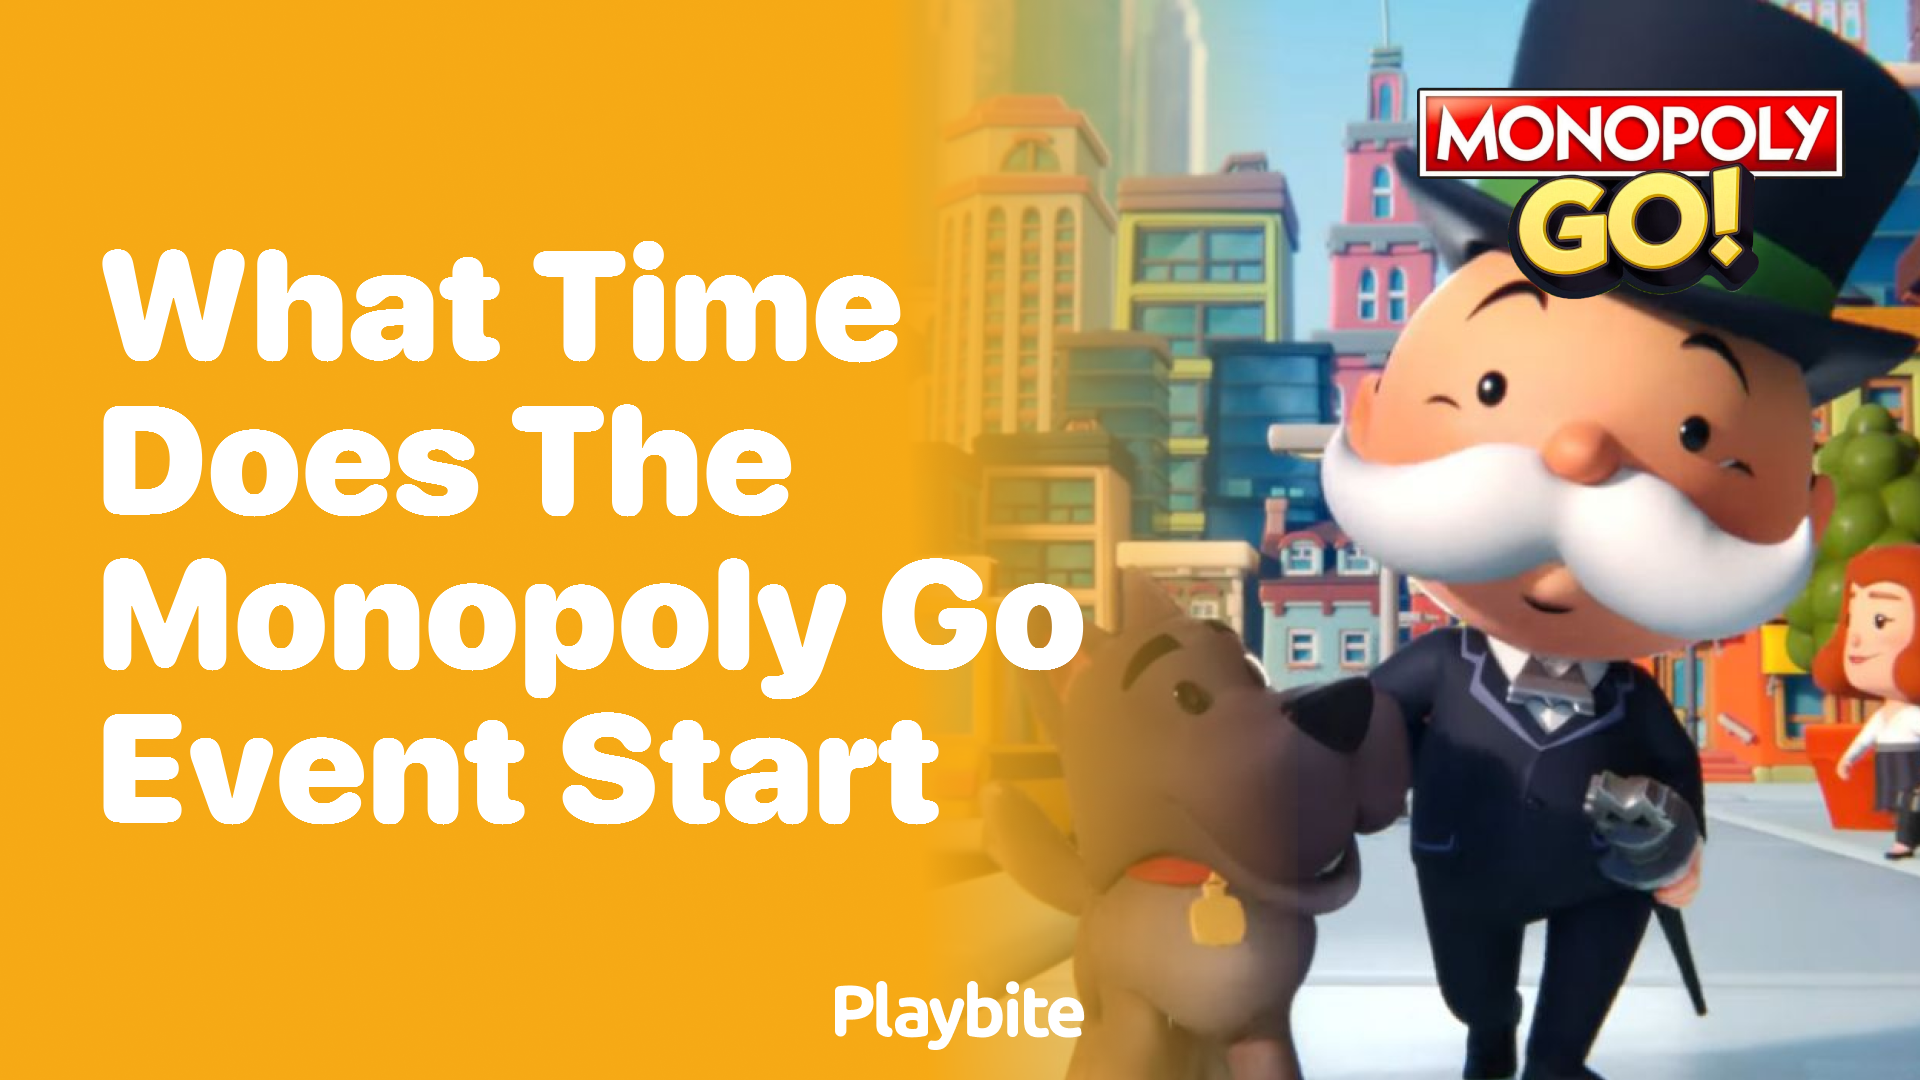 What Time Does the Monopoly Go Event Start?